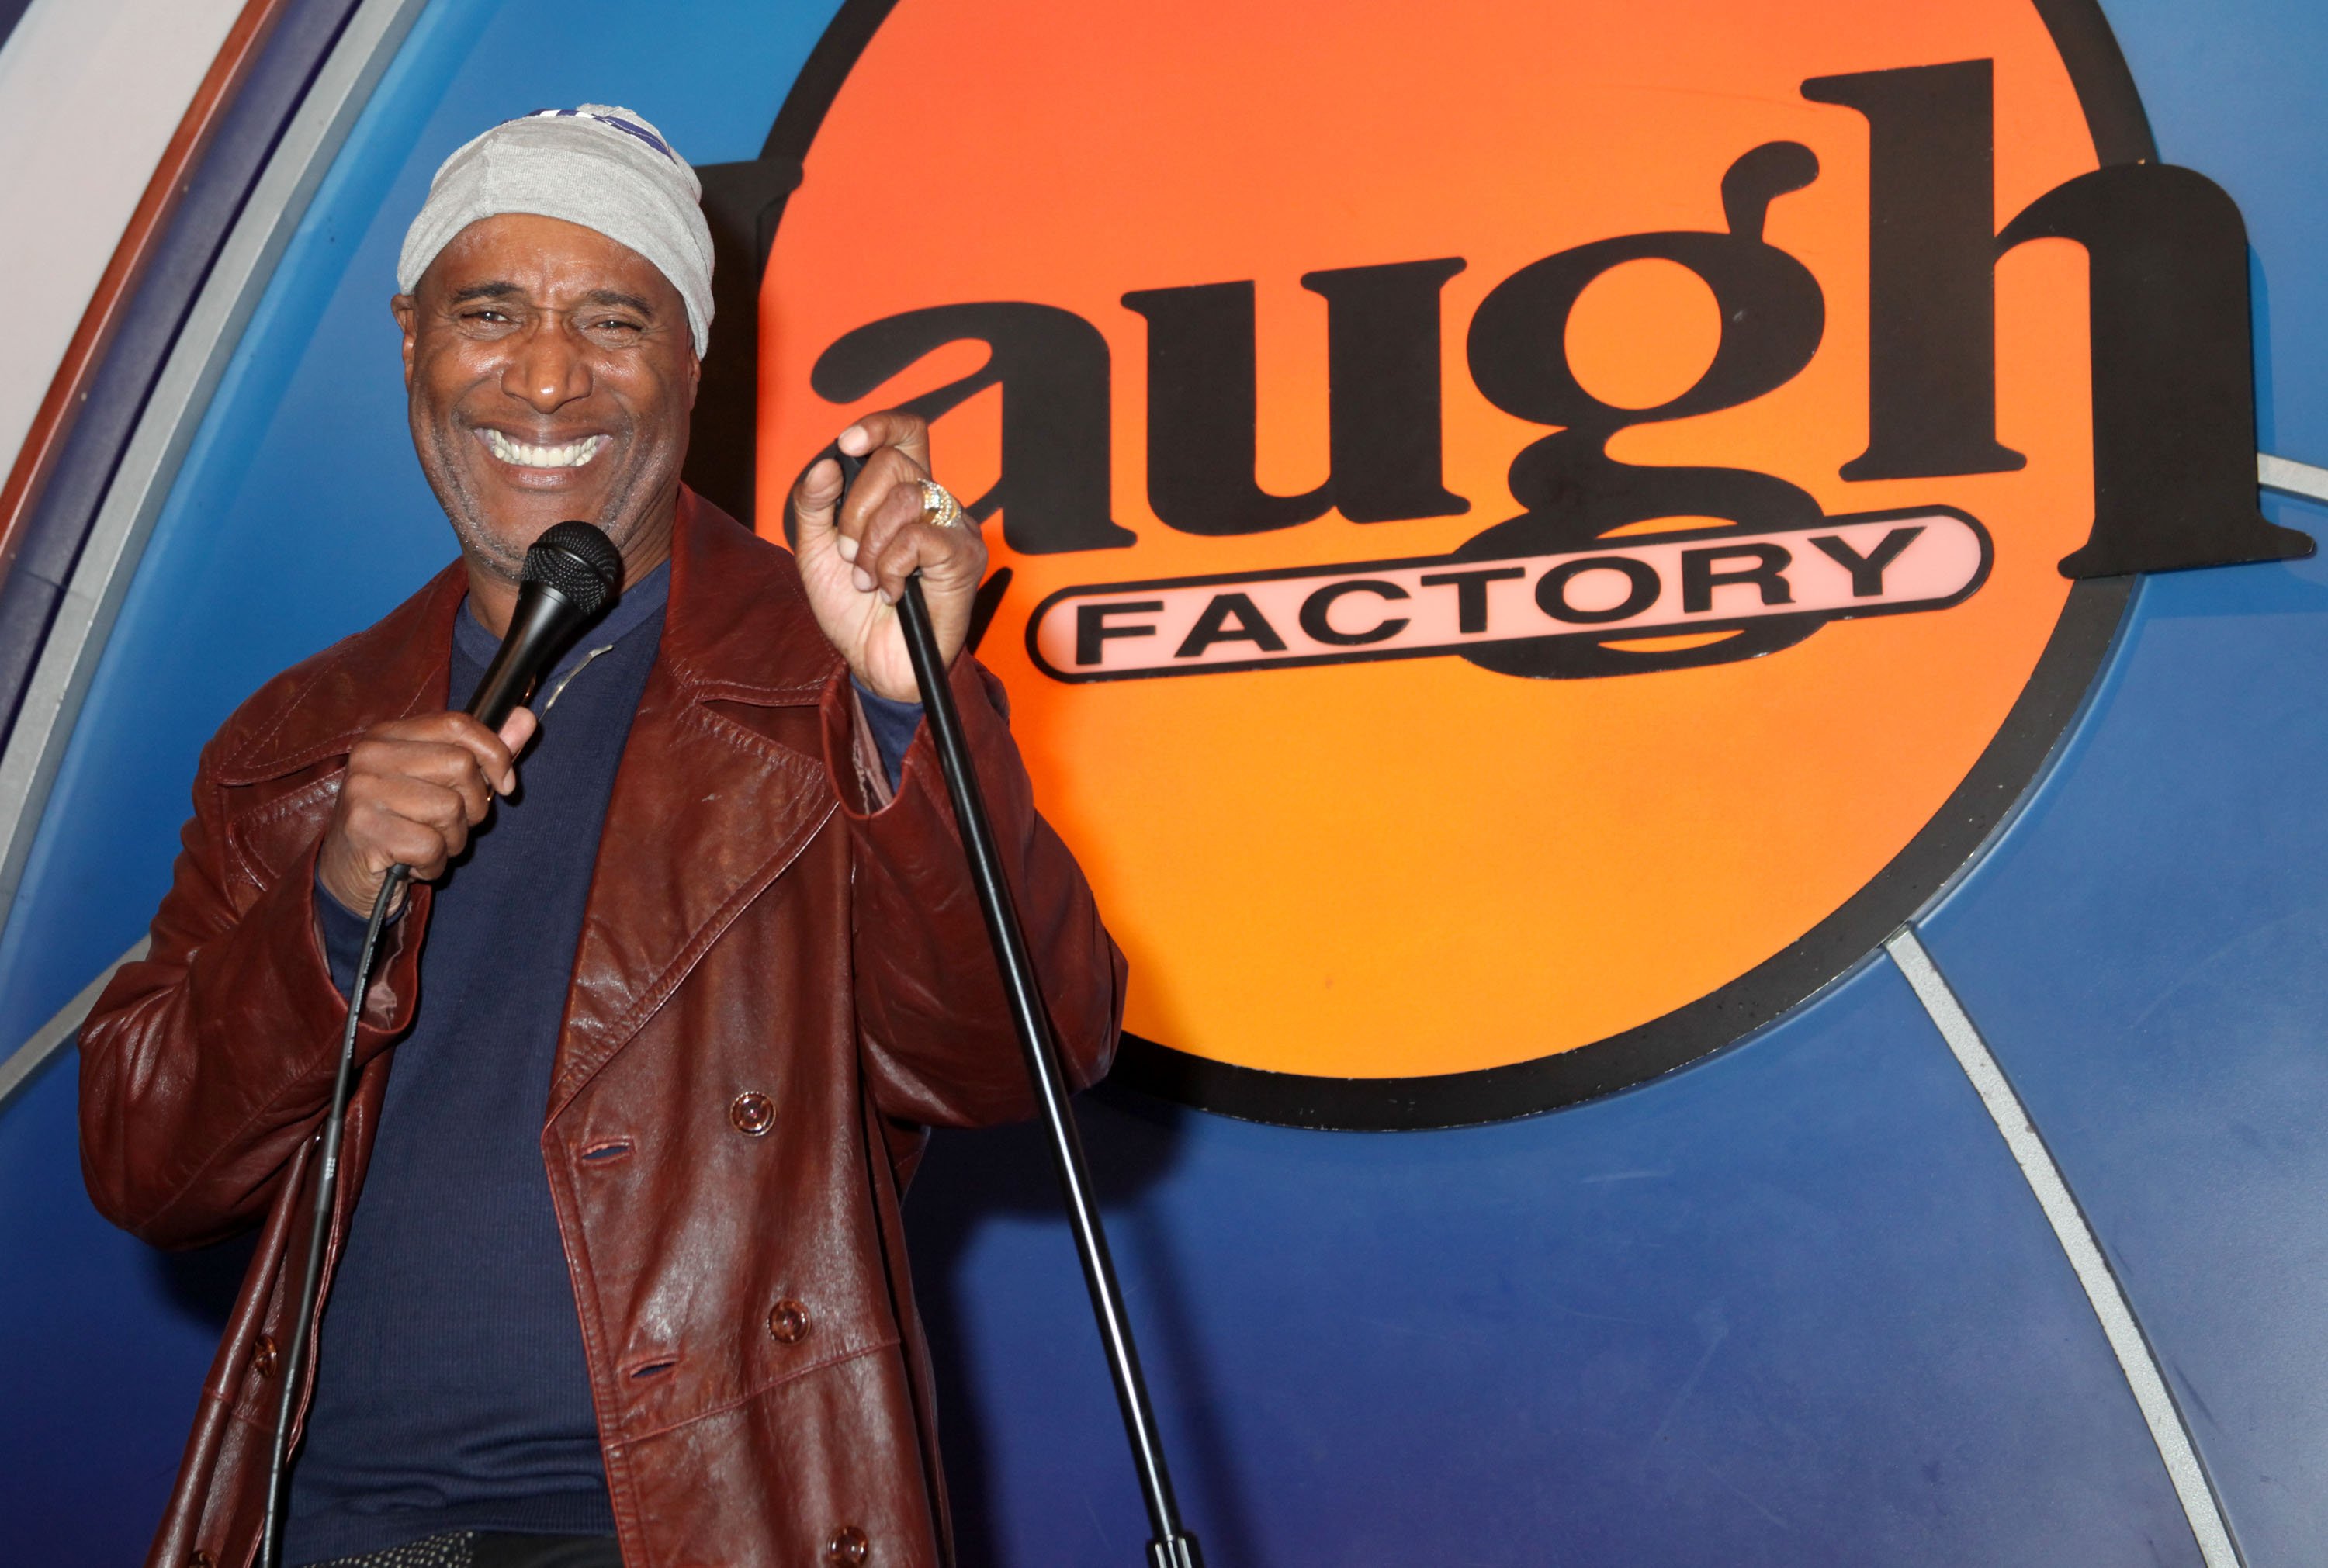 Paul Mooney Was a Talented Comedian What Was His Net Worth?